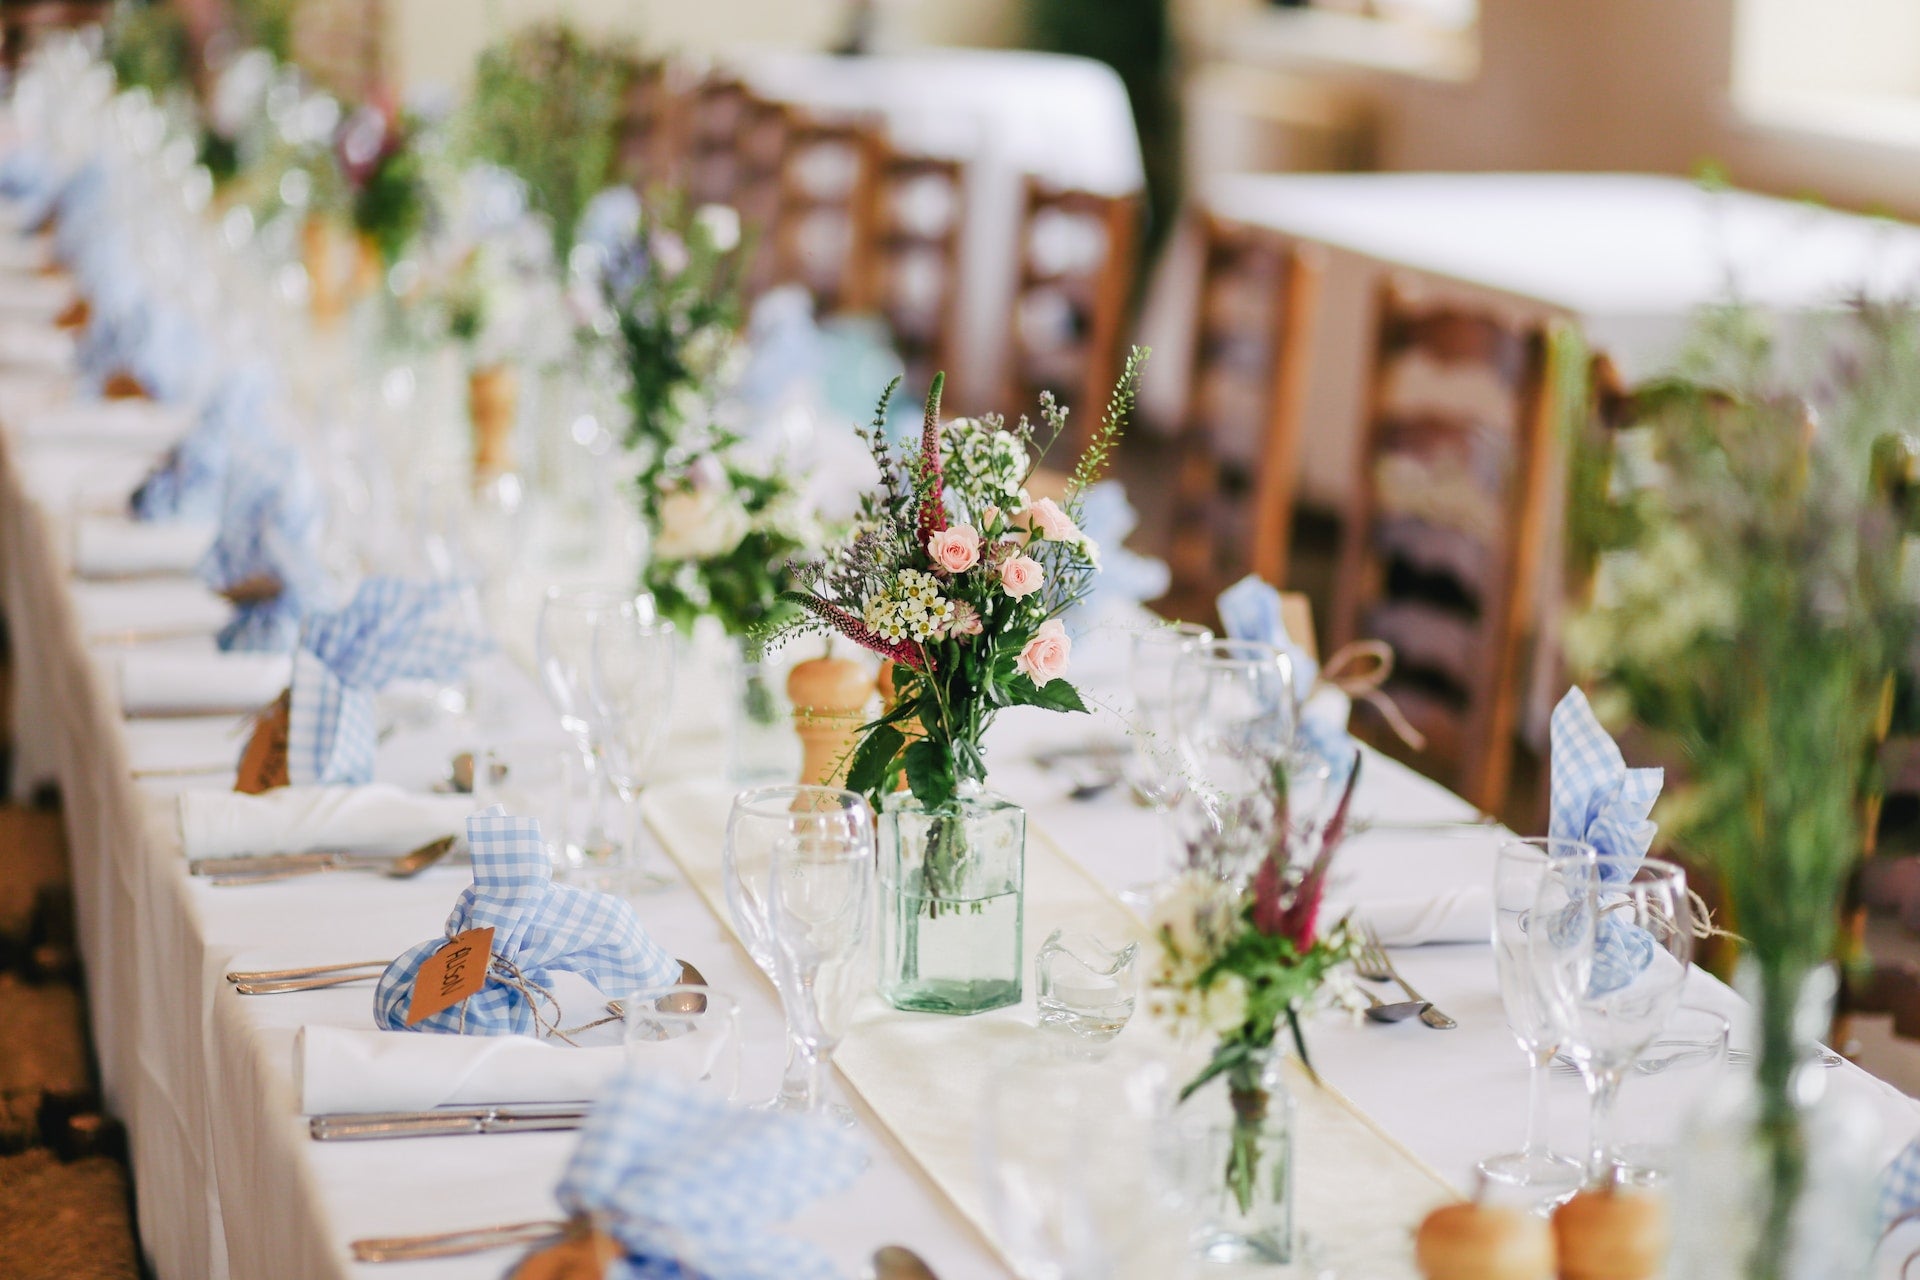 Floral centerpieces set on the table